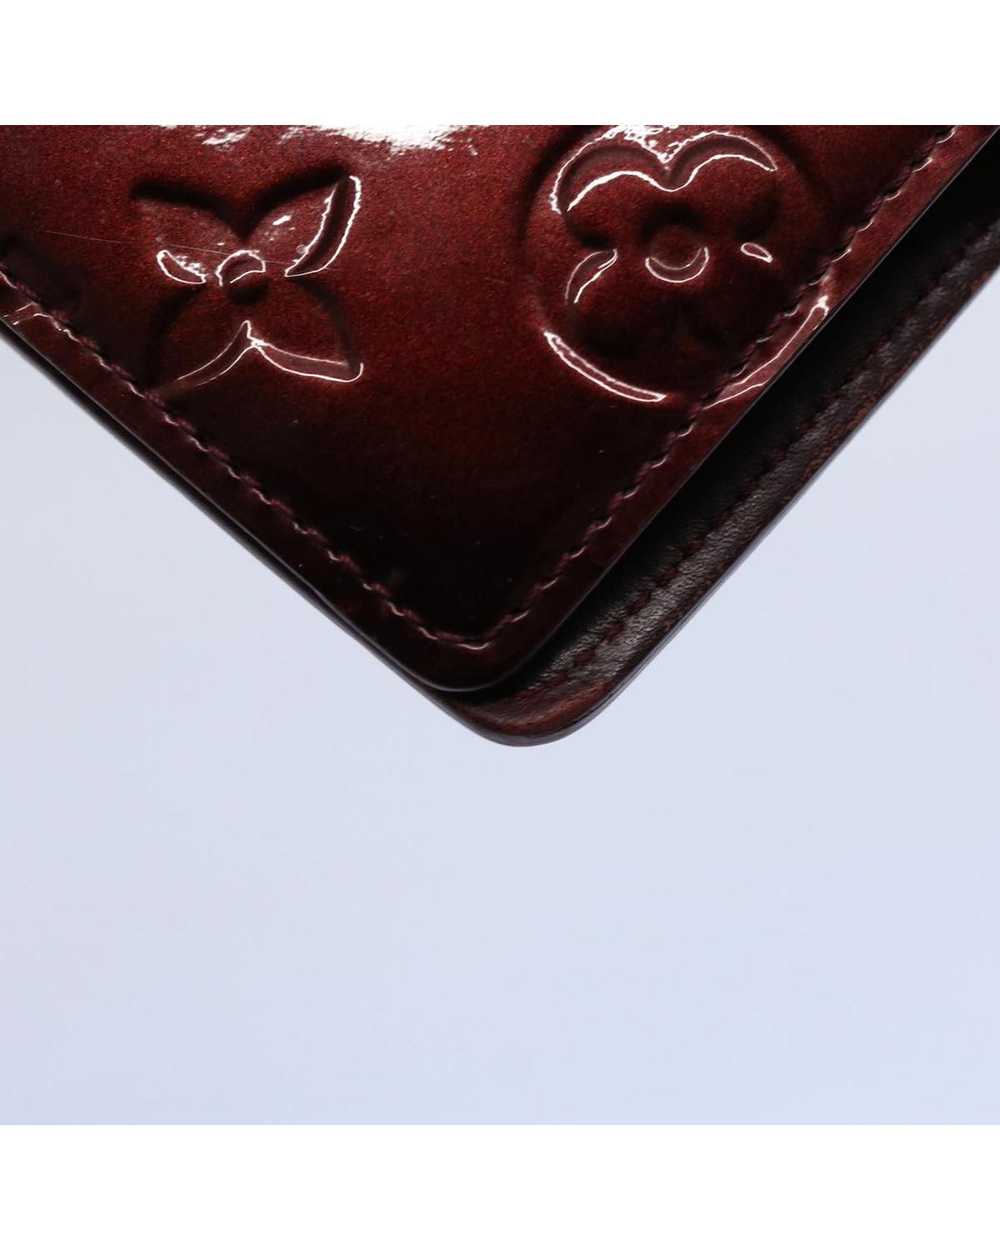 Louis Vuitton Burgundy Patent Leather Diary Cover - image 8